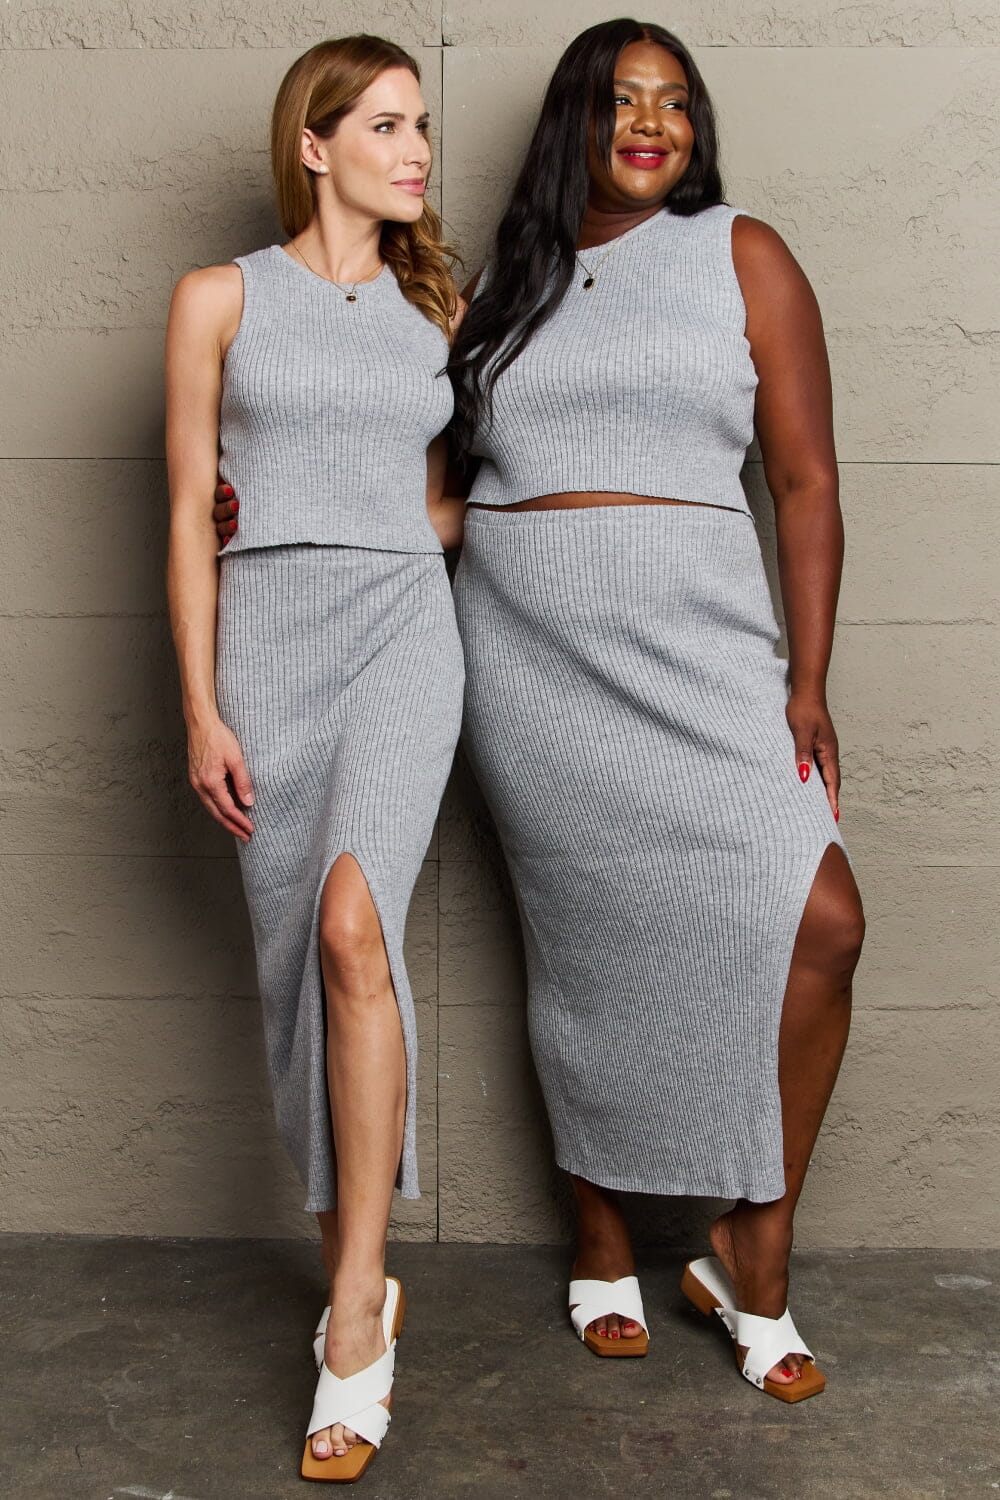 Sew In Love Charcoal Grey 2 pcs Round Neck Sleeveless Crop top and Fitted Skirt Set Outfit Sets jehouze 